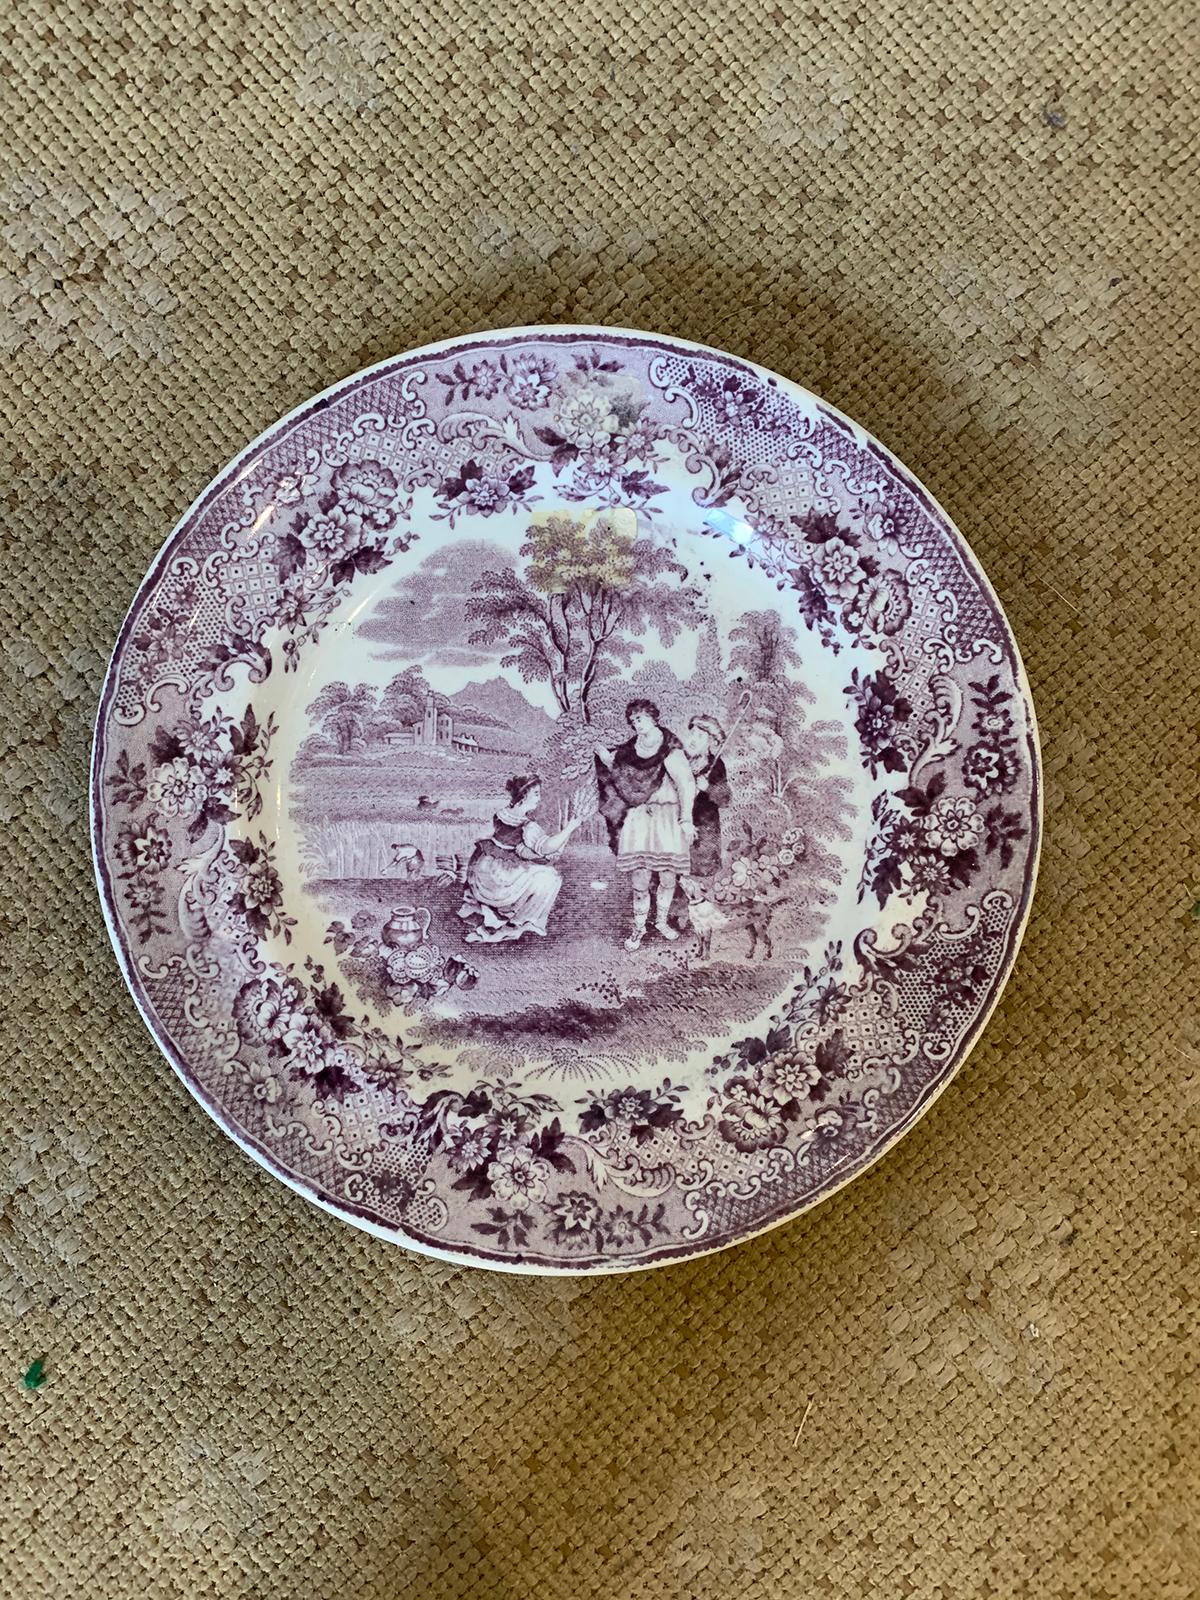 Late 19th century circa 1880s Dutch purple and white transferware pottery round plate in Ruth Boas Pattern by Petrus Regout & Co. Maastricht / Royal Spinx Factory, Marked.